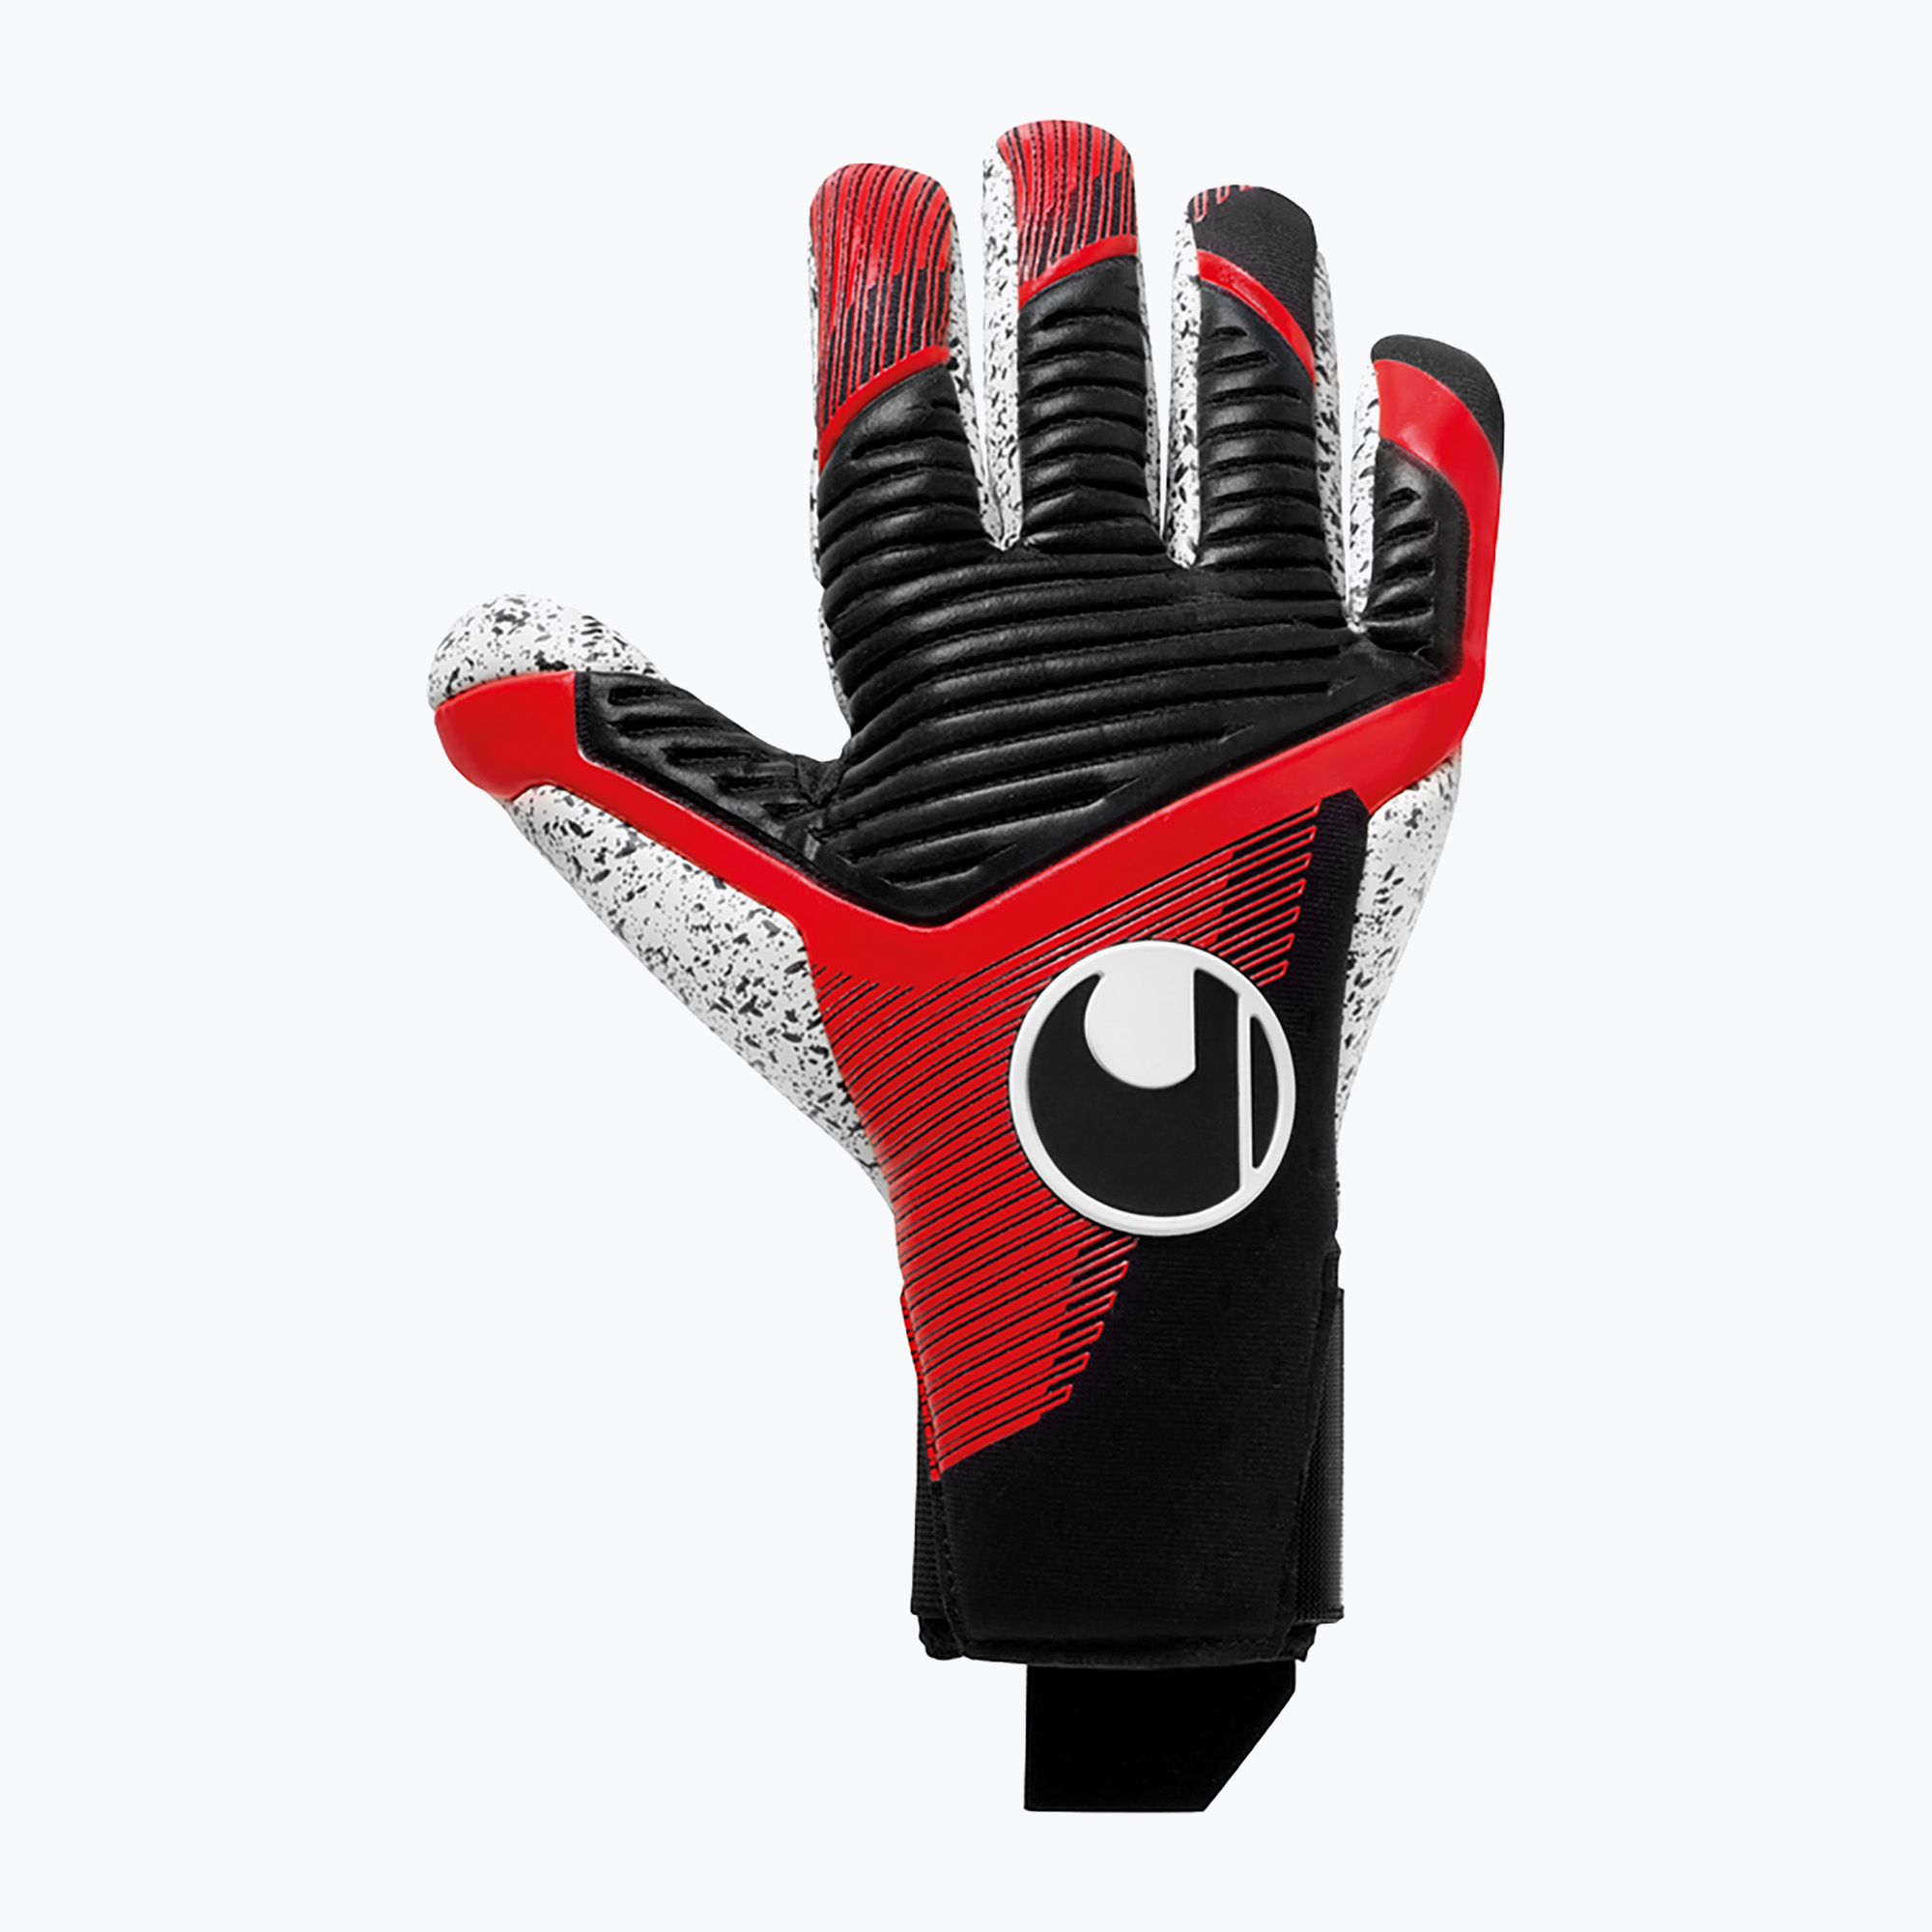 Uhlsport Powerline Supergrip  Finger Surround Вратарски ръкавици